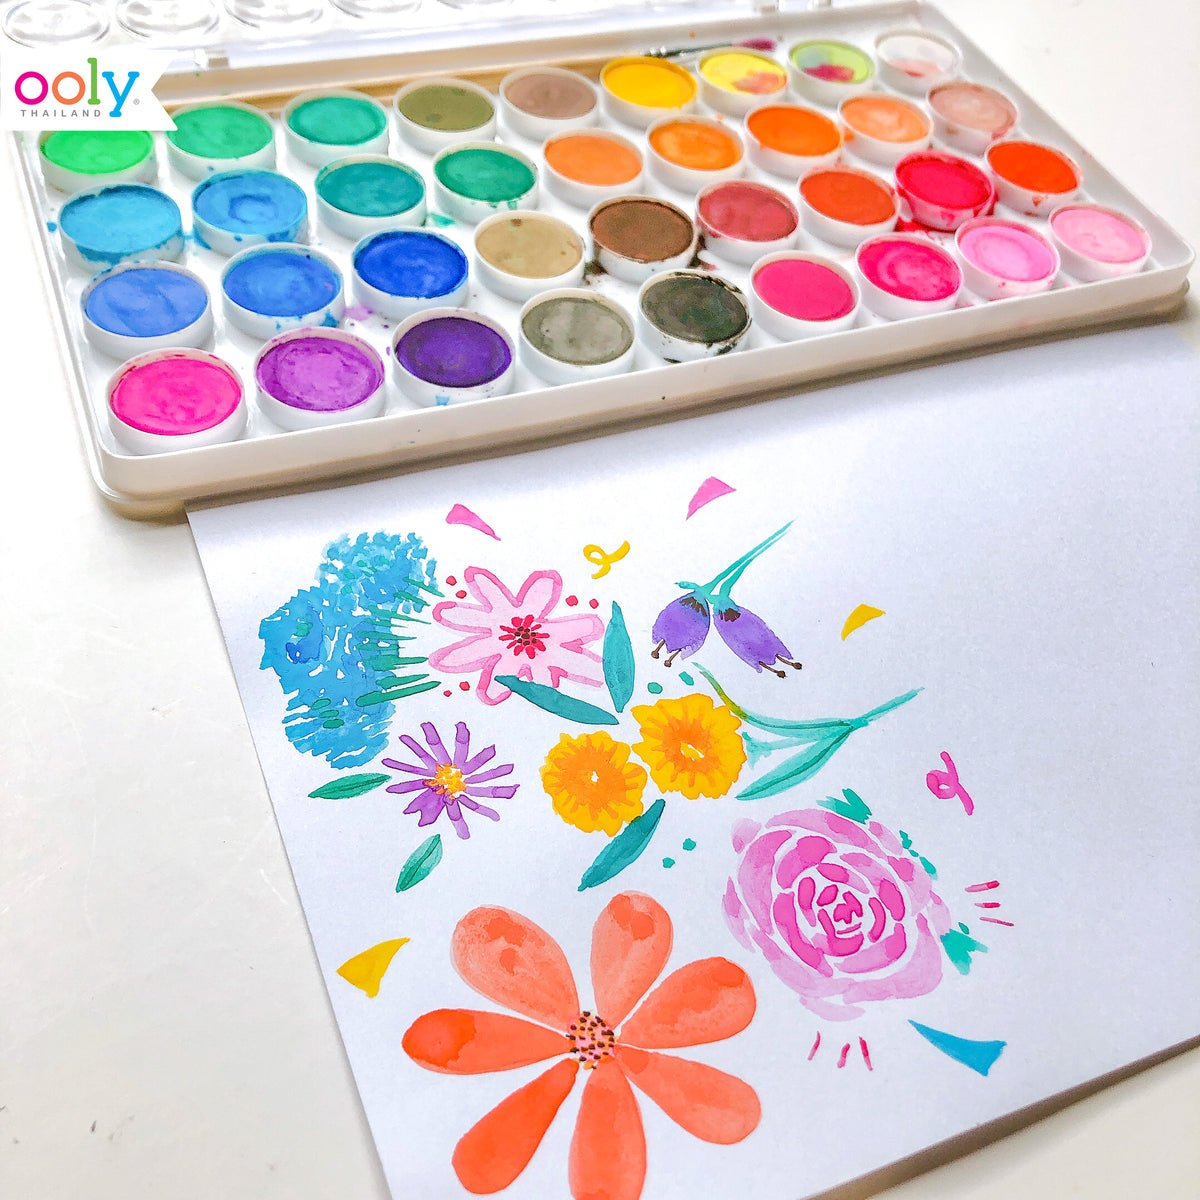 Ooly Lil Watercolor Paint Pods with Set of 36